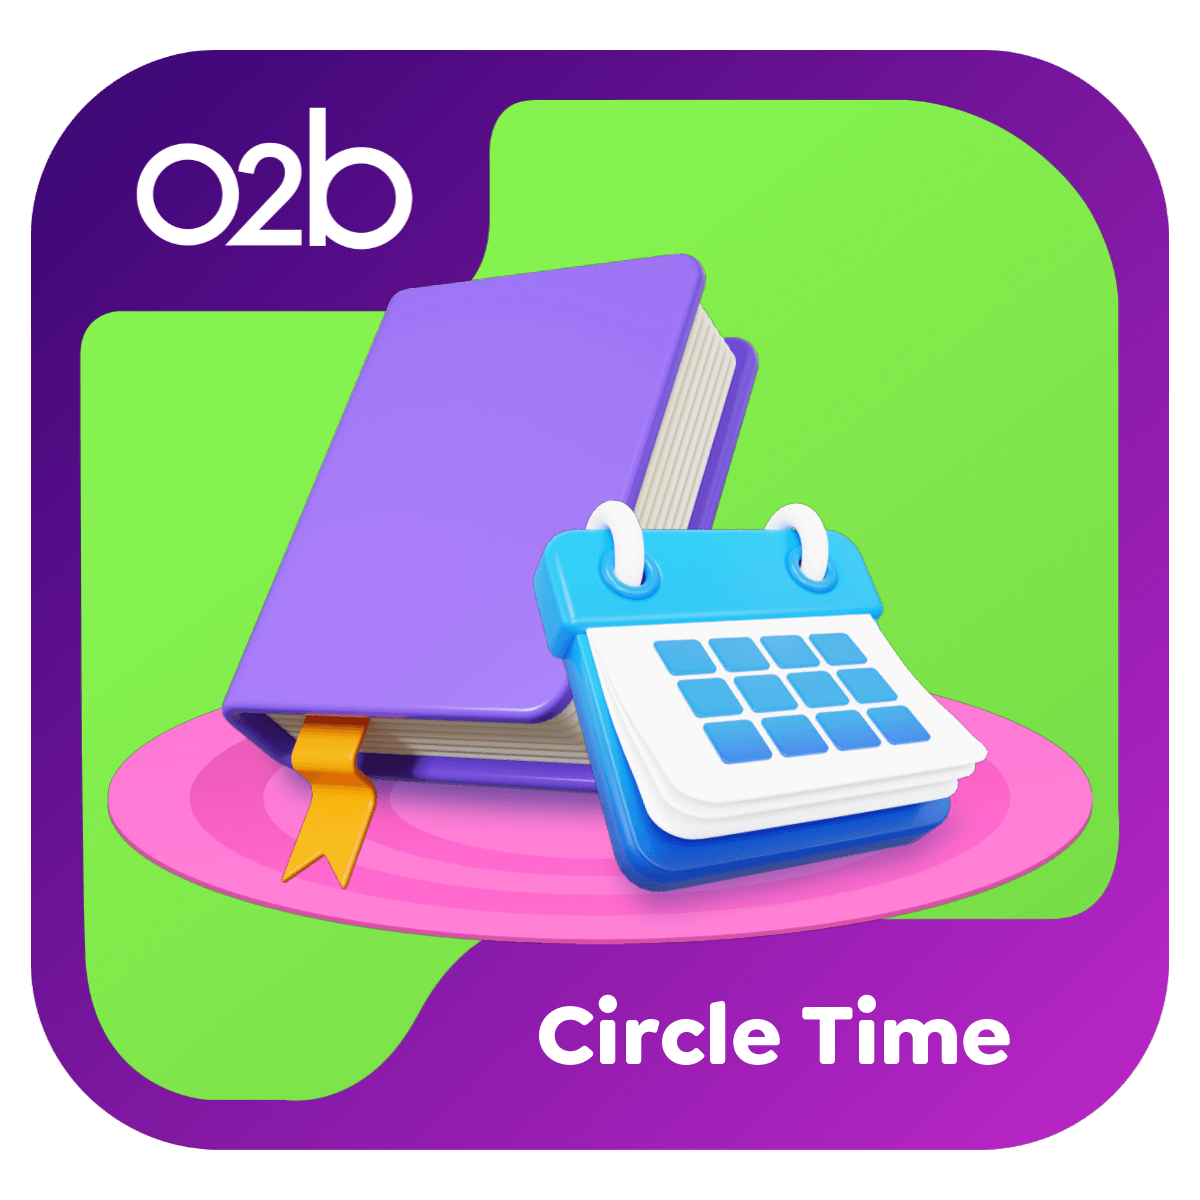 Purple book and blue/white calendar on pink carpet, on top of green background. O2B - Circle Time